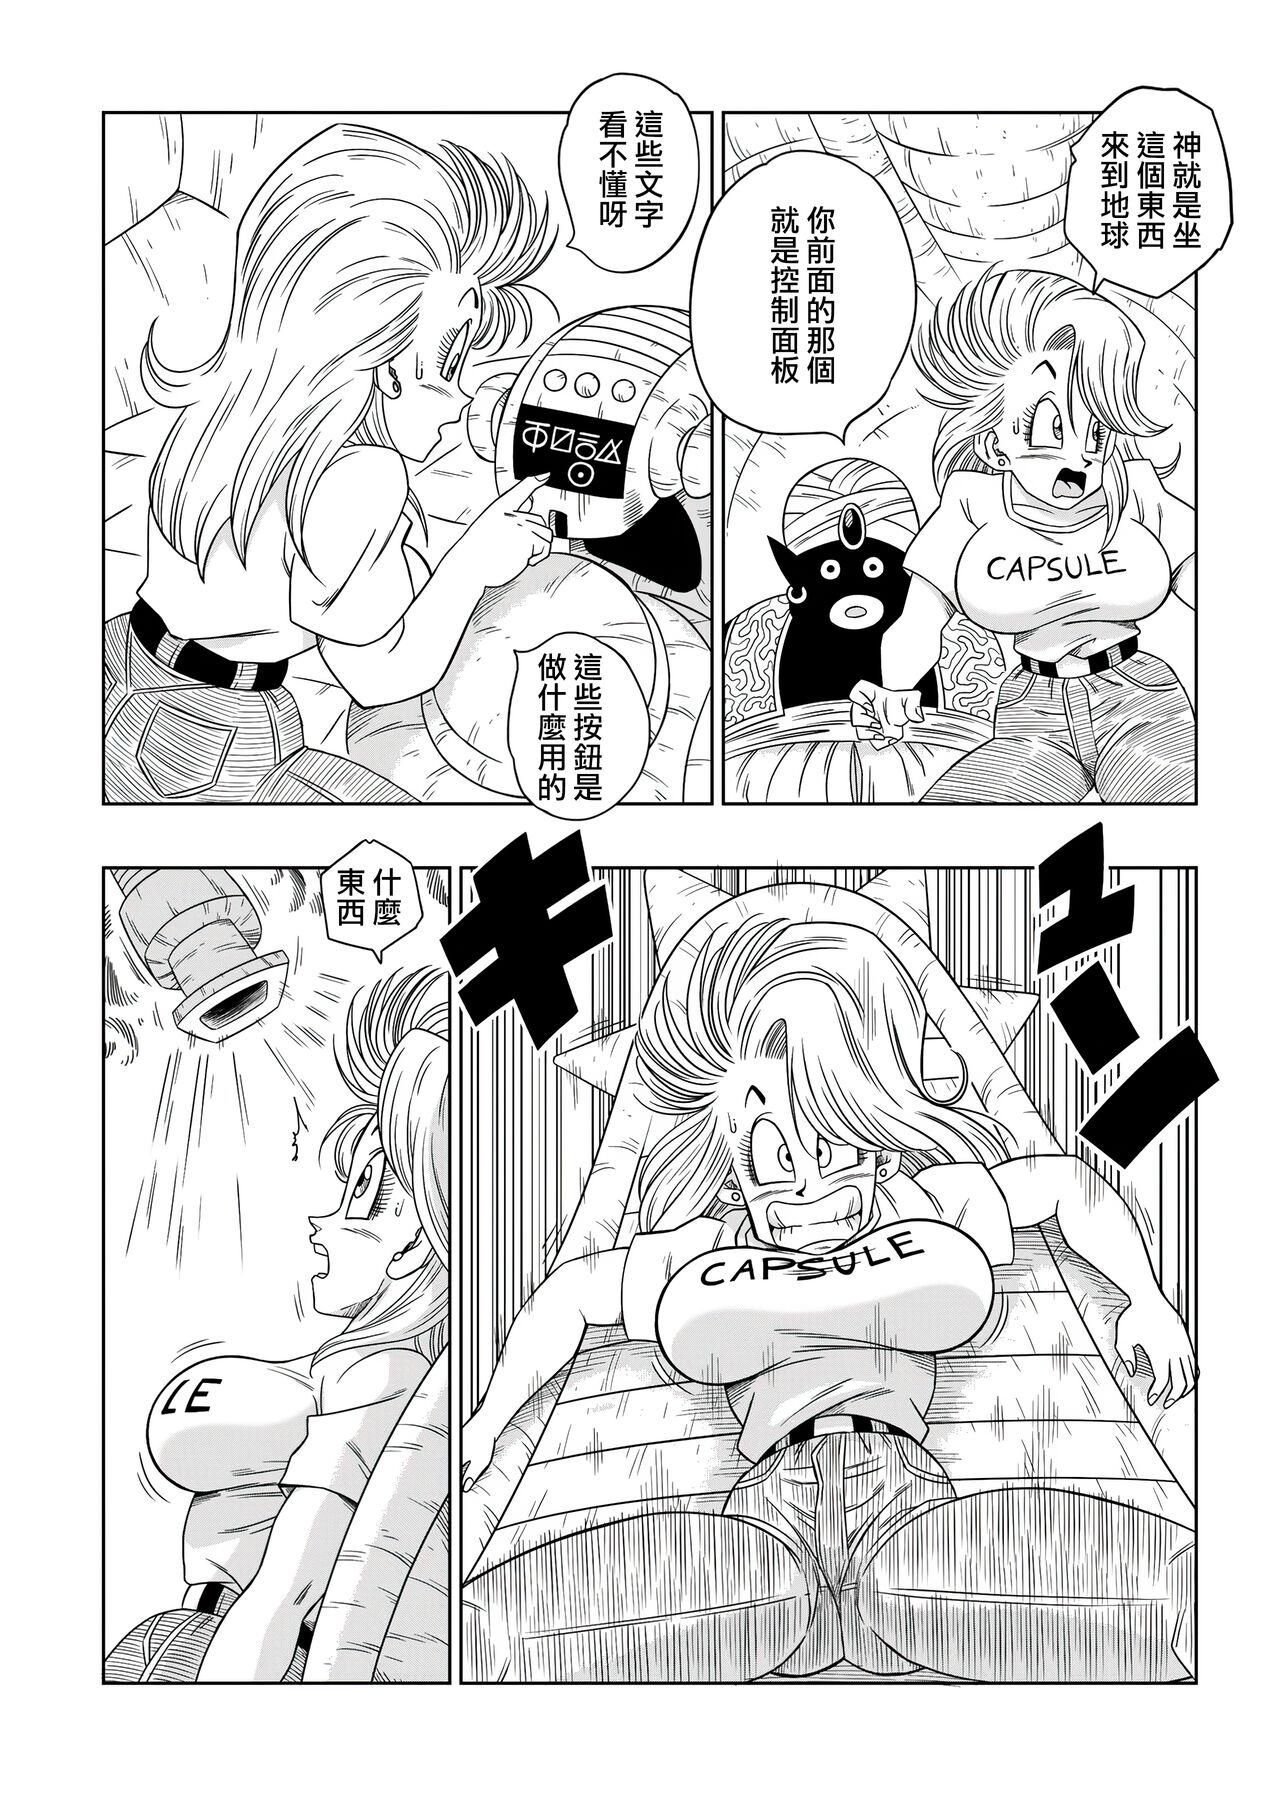 Cameltoe Bulma Meets Mr.Popo - Sex inside the Mysterious Spaceship! - Dragon ball z Daring - Page 6